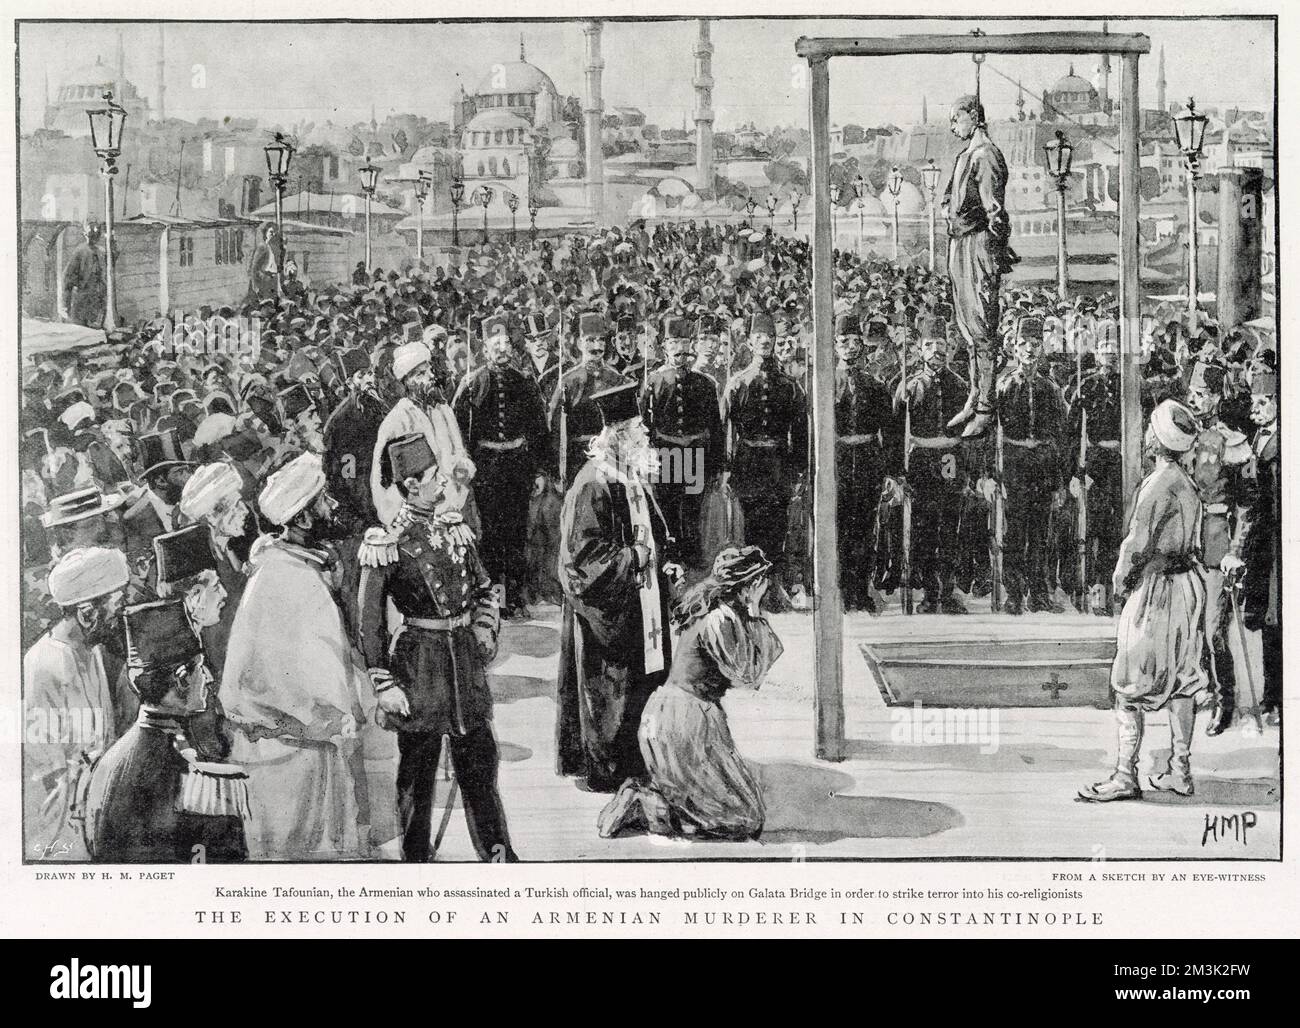 The public hanging of Karakine Tafounian, an Armenian who had killed a Turkish offical, on the Galata Bridge in Constantinople (now Istanbul). Stock Photo